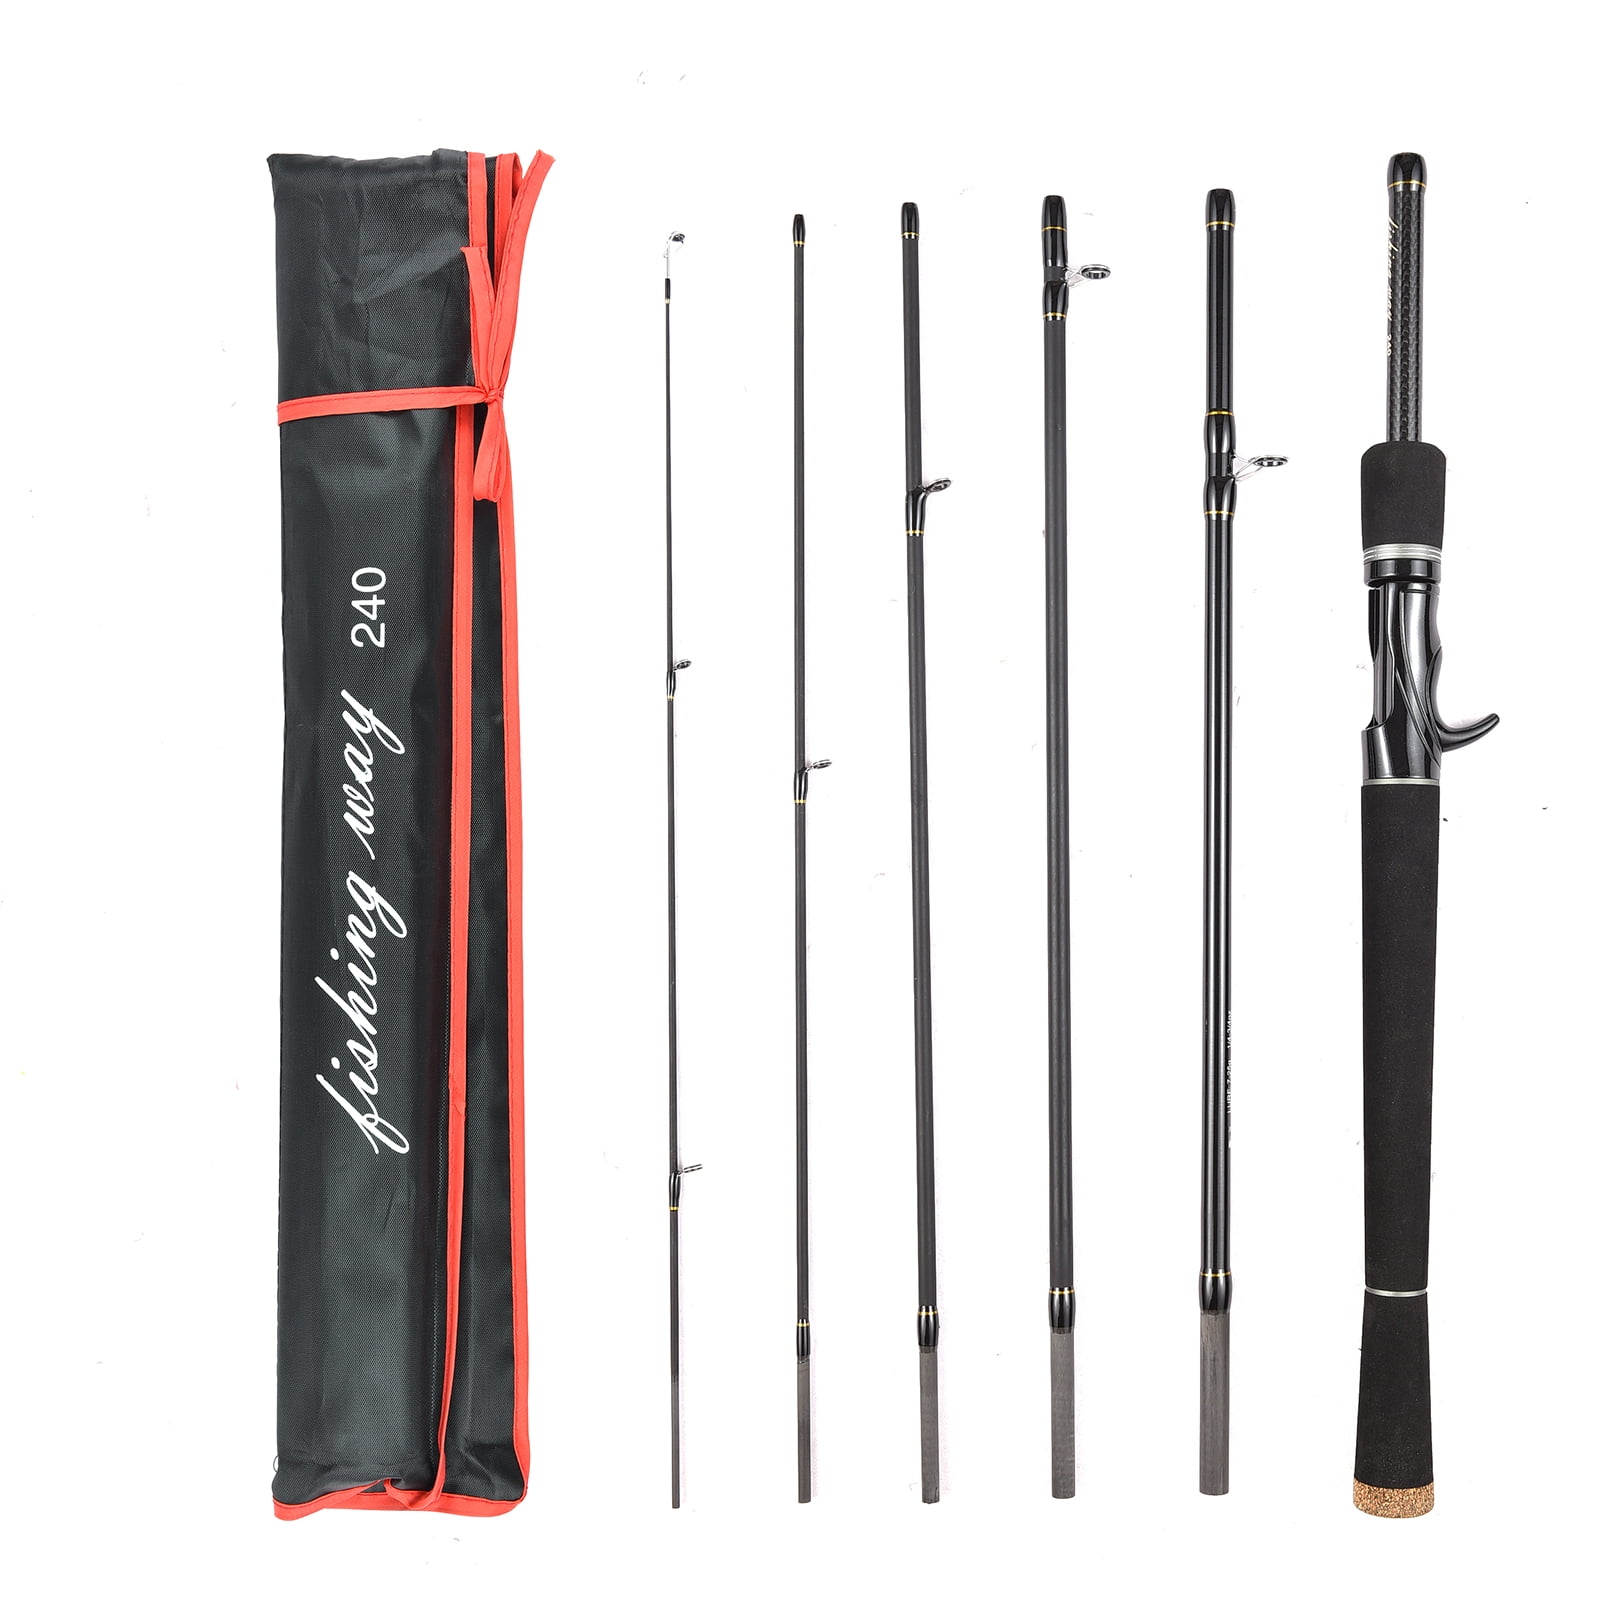 Ultralight 6 Piece Travel Fishing Rod - Spinning/Casting Pole with Storage  Bag Included 